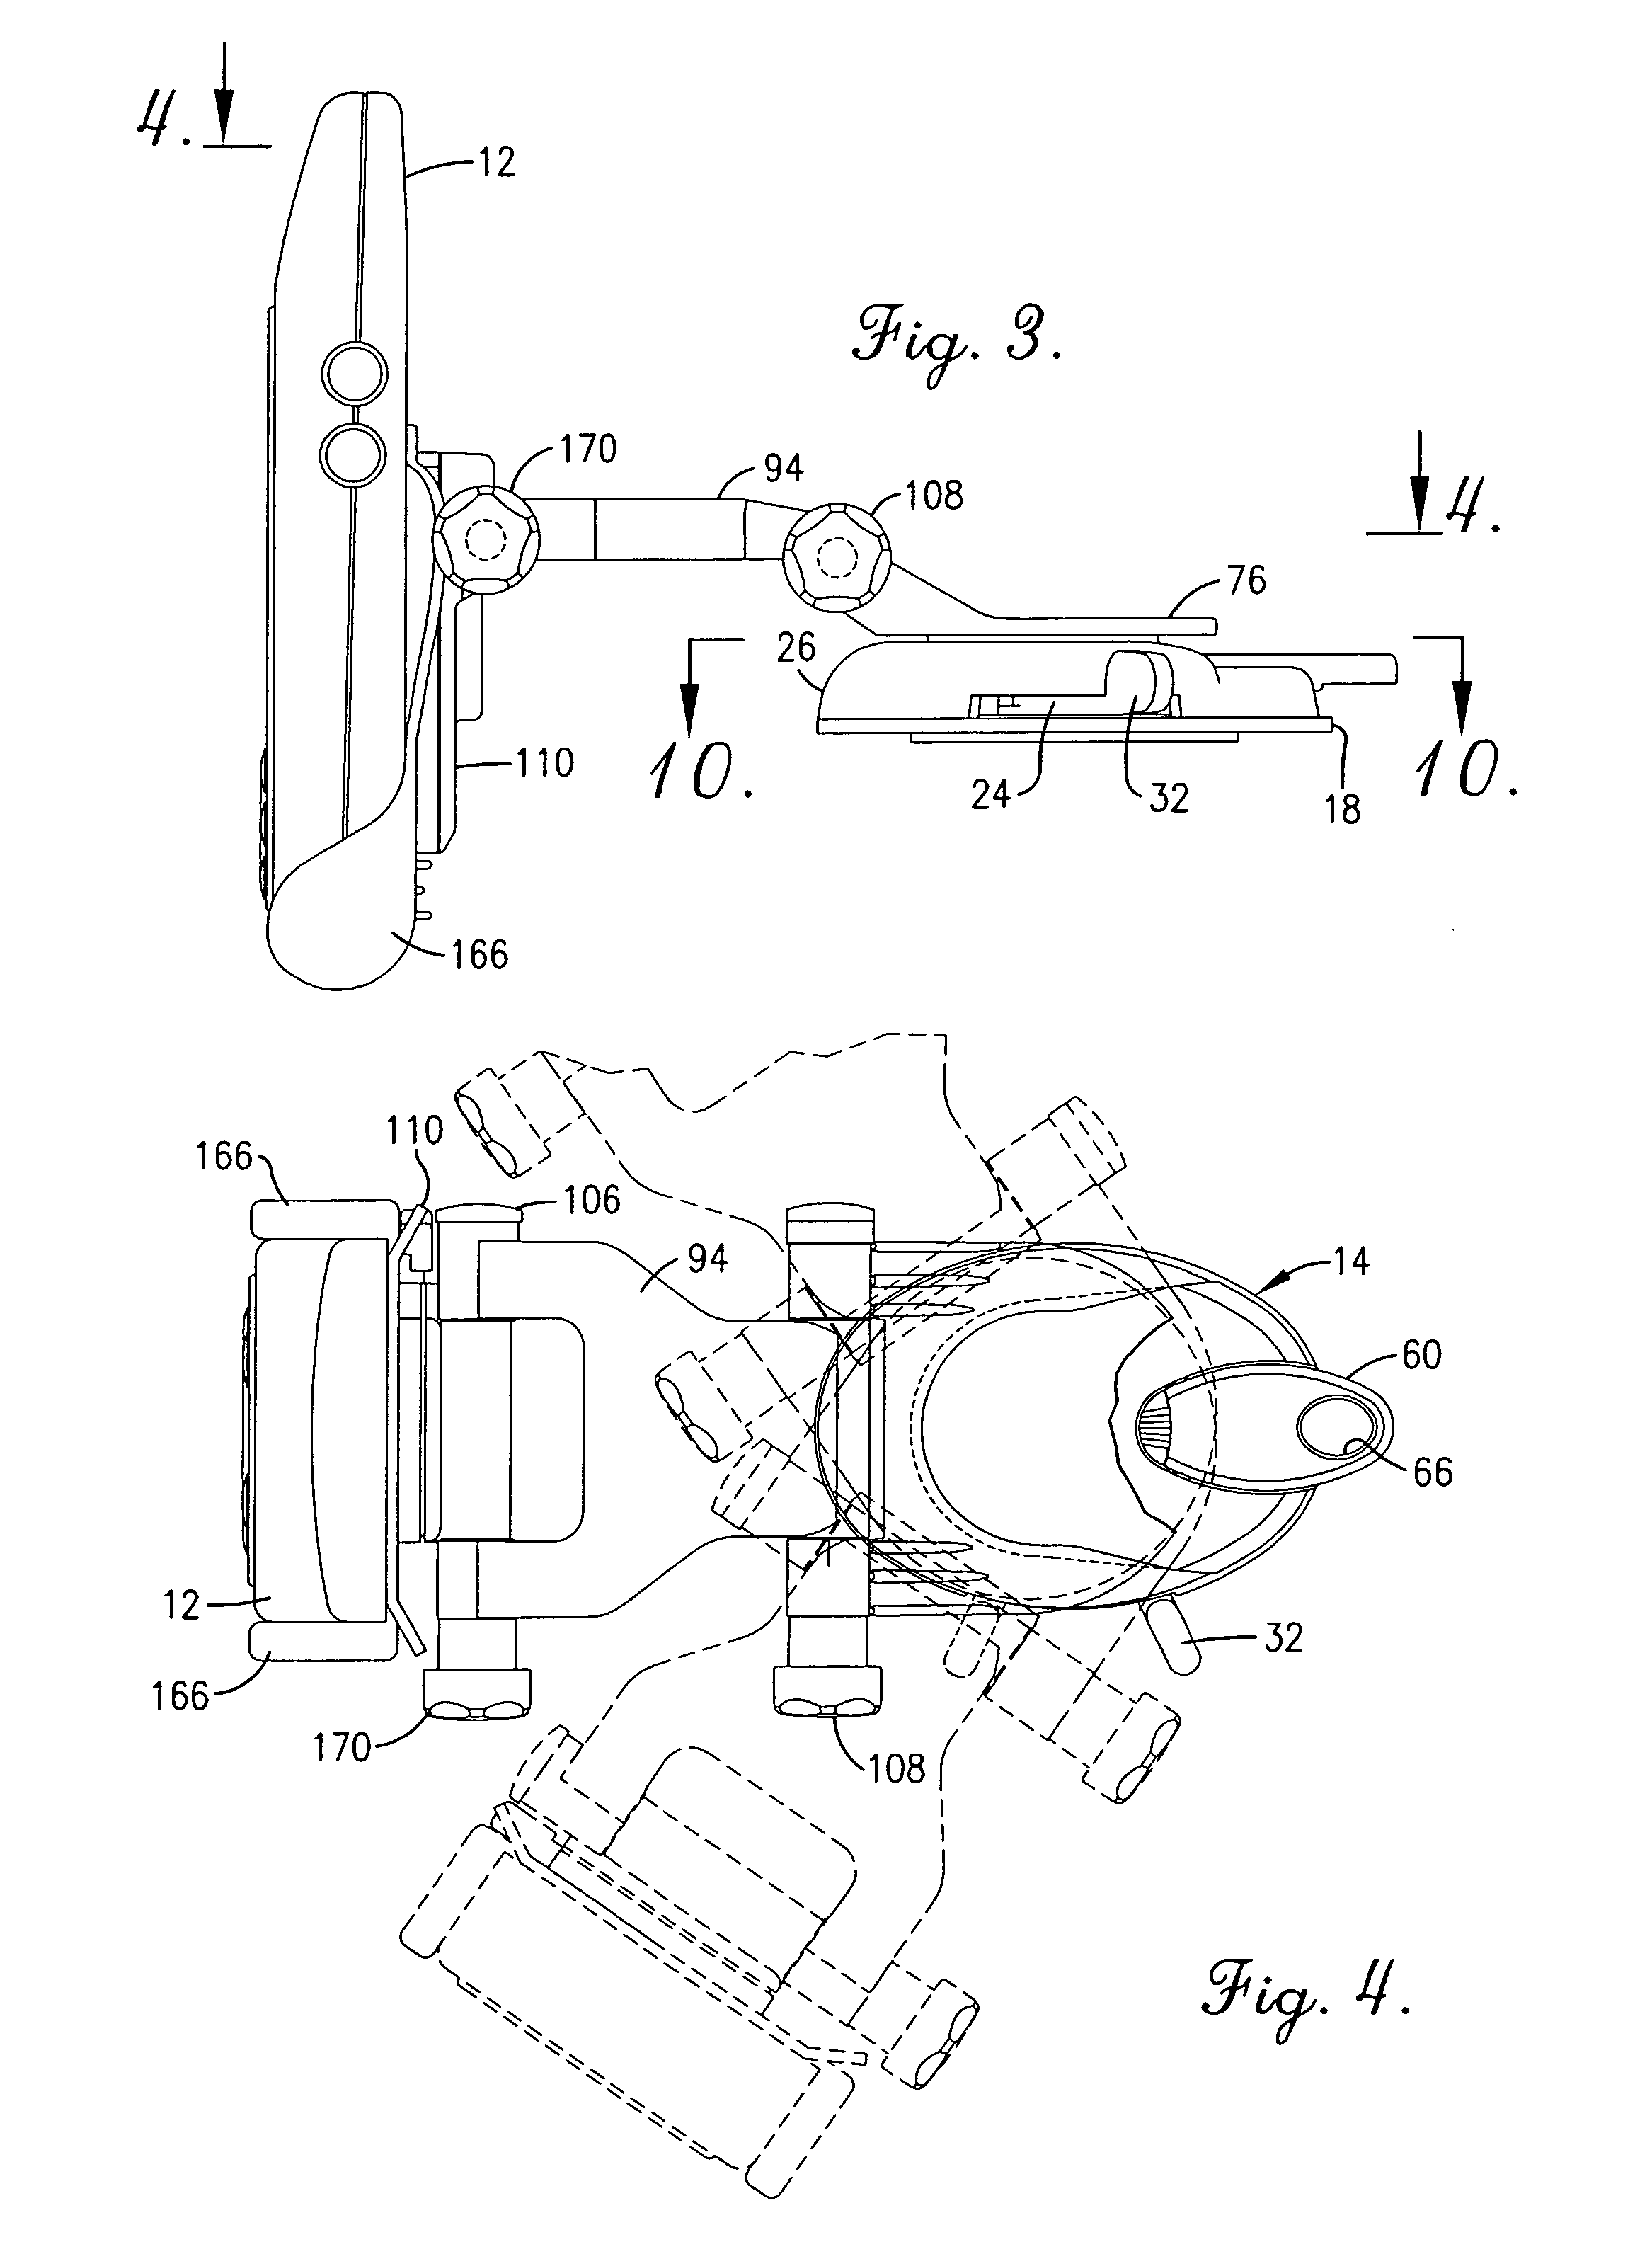 Multi-position articulating mounting apparatus for an electronic device